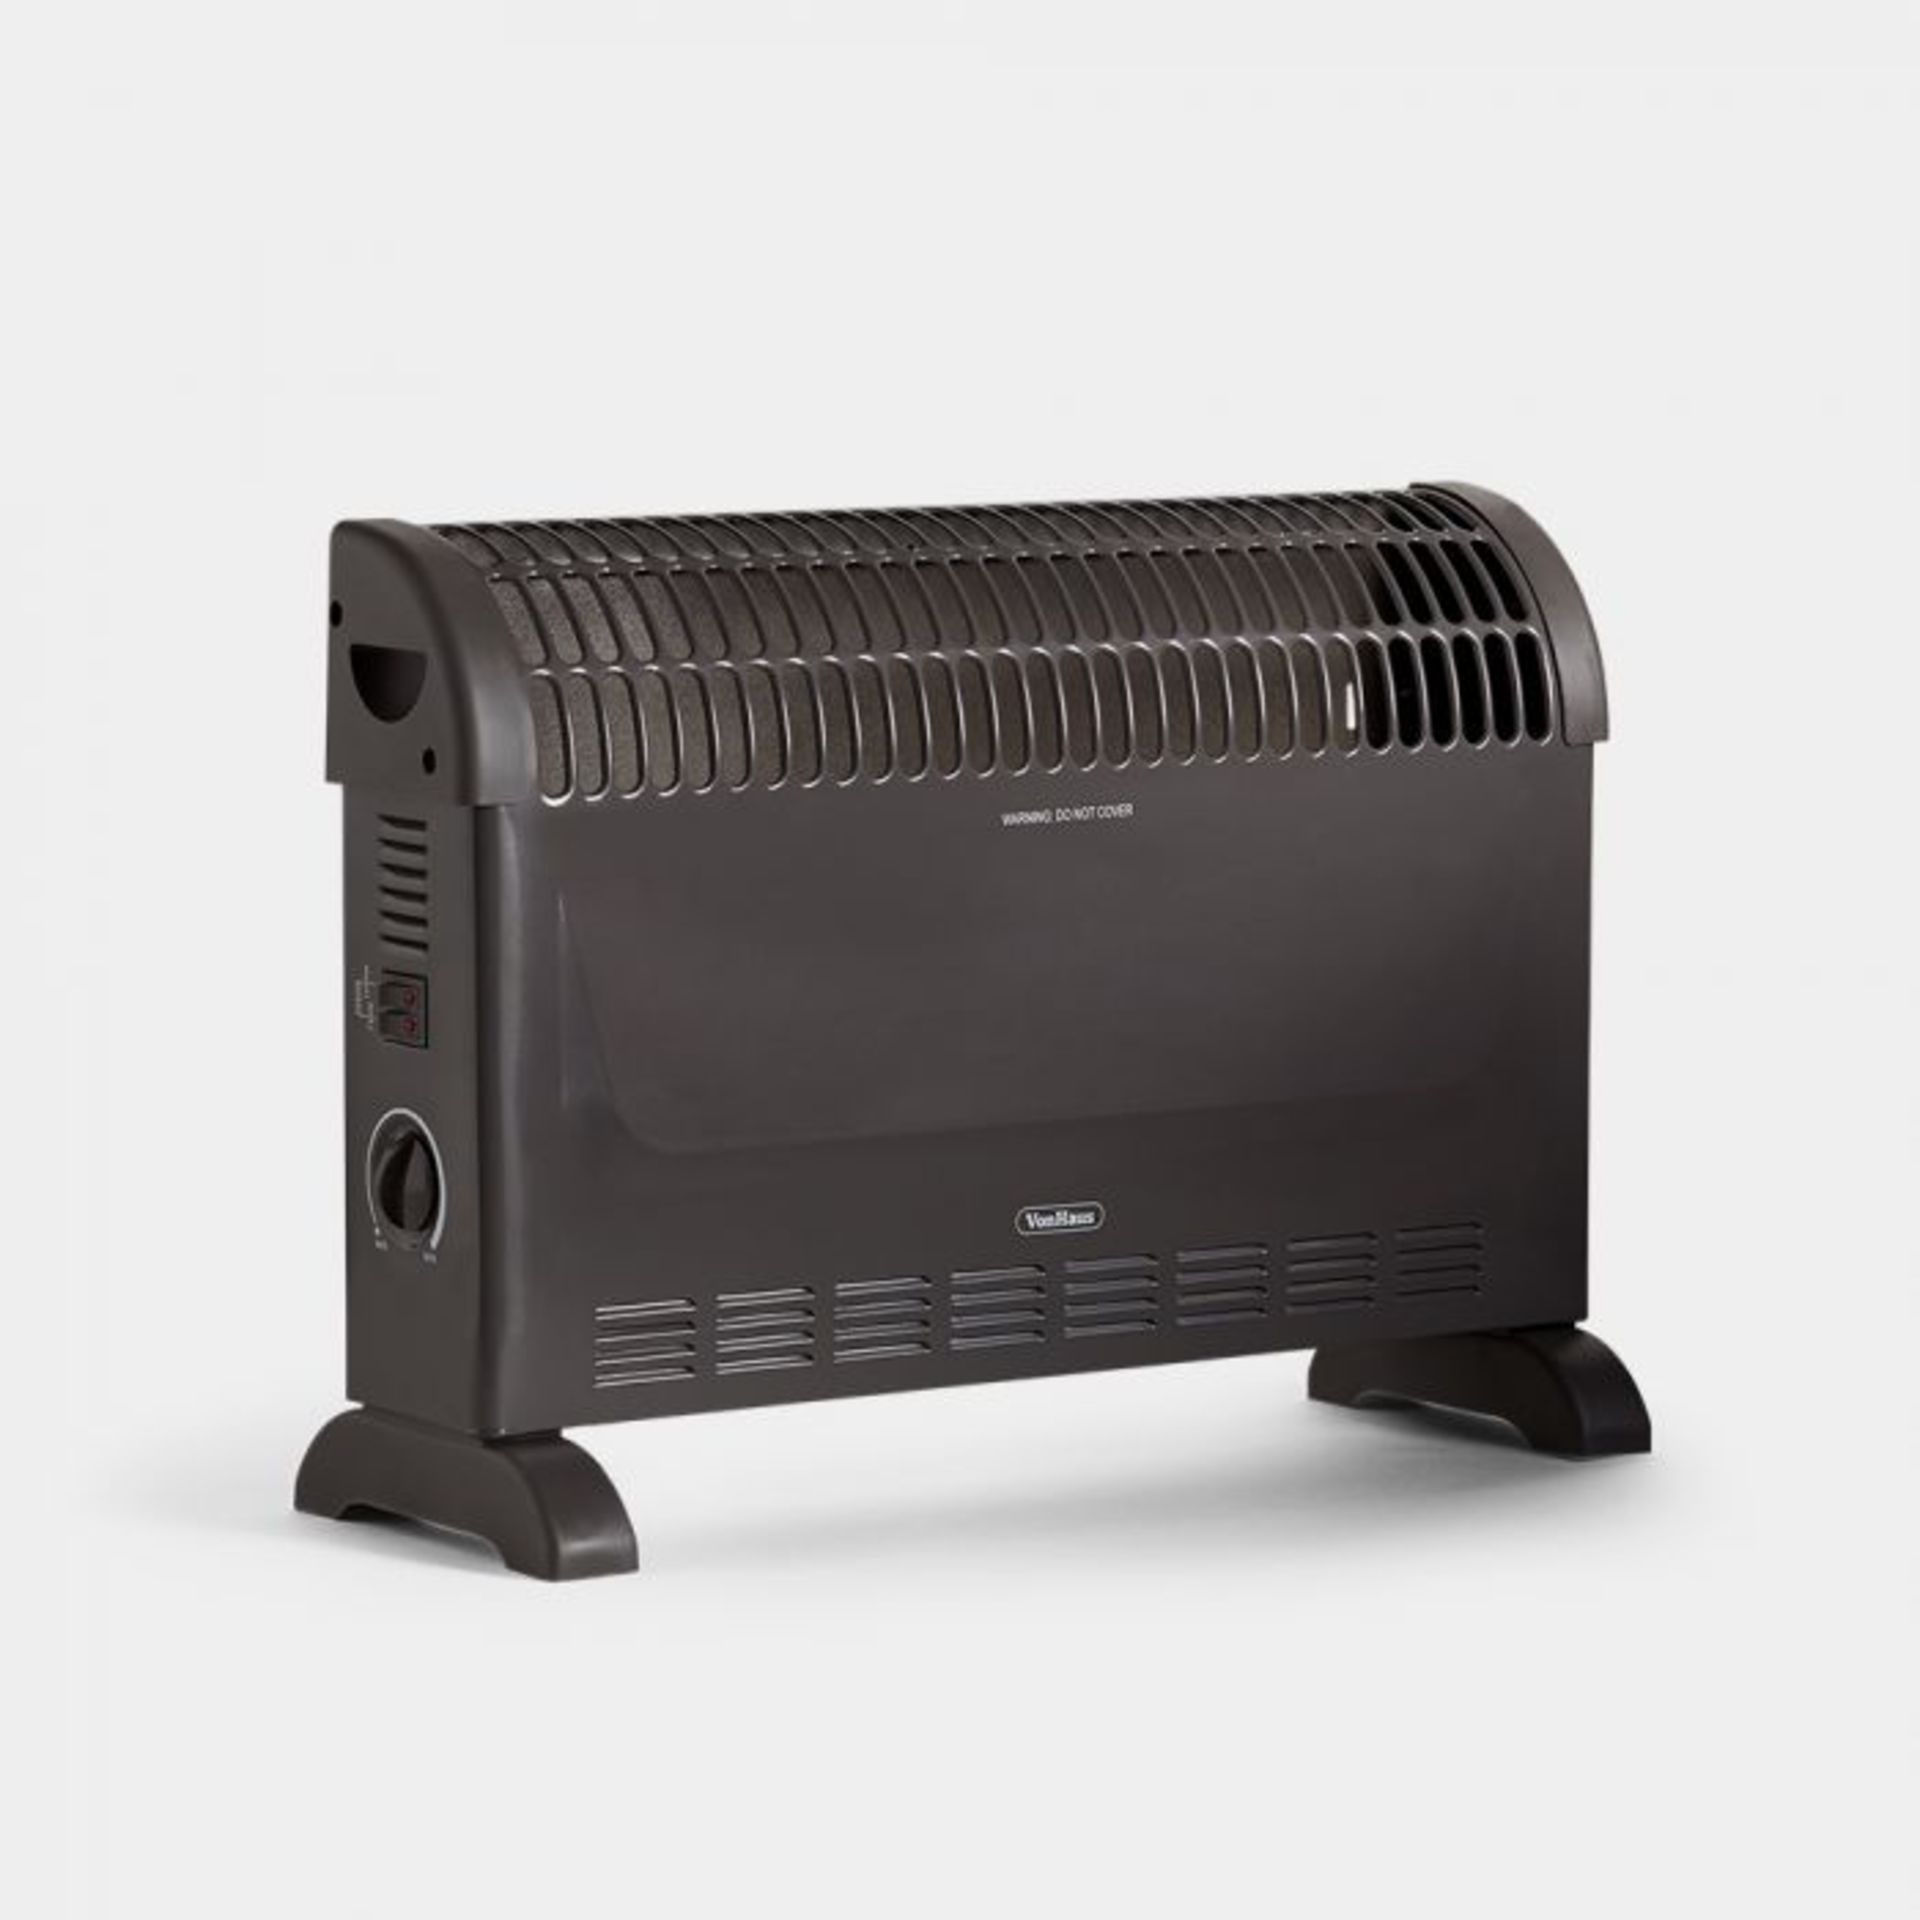 (NN92) 2000W Convector Heater Handy and portable, this freestanding convector heater delivers ... - Image 2 of 3